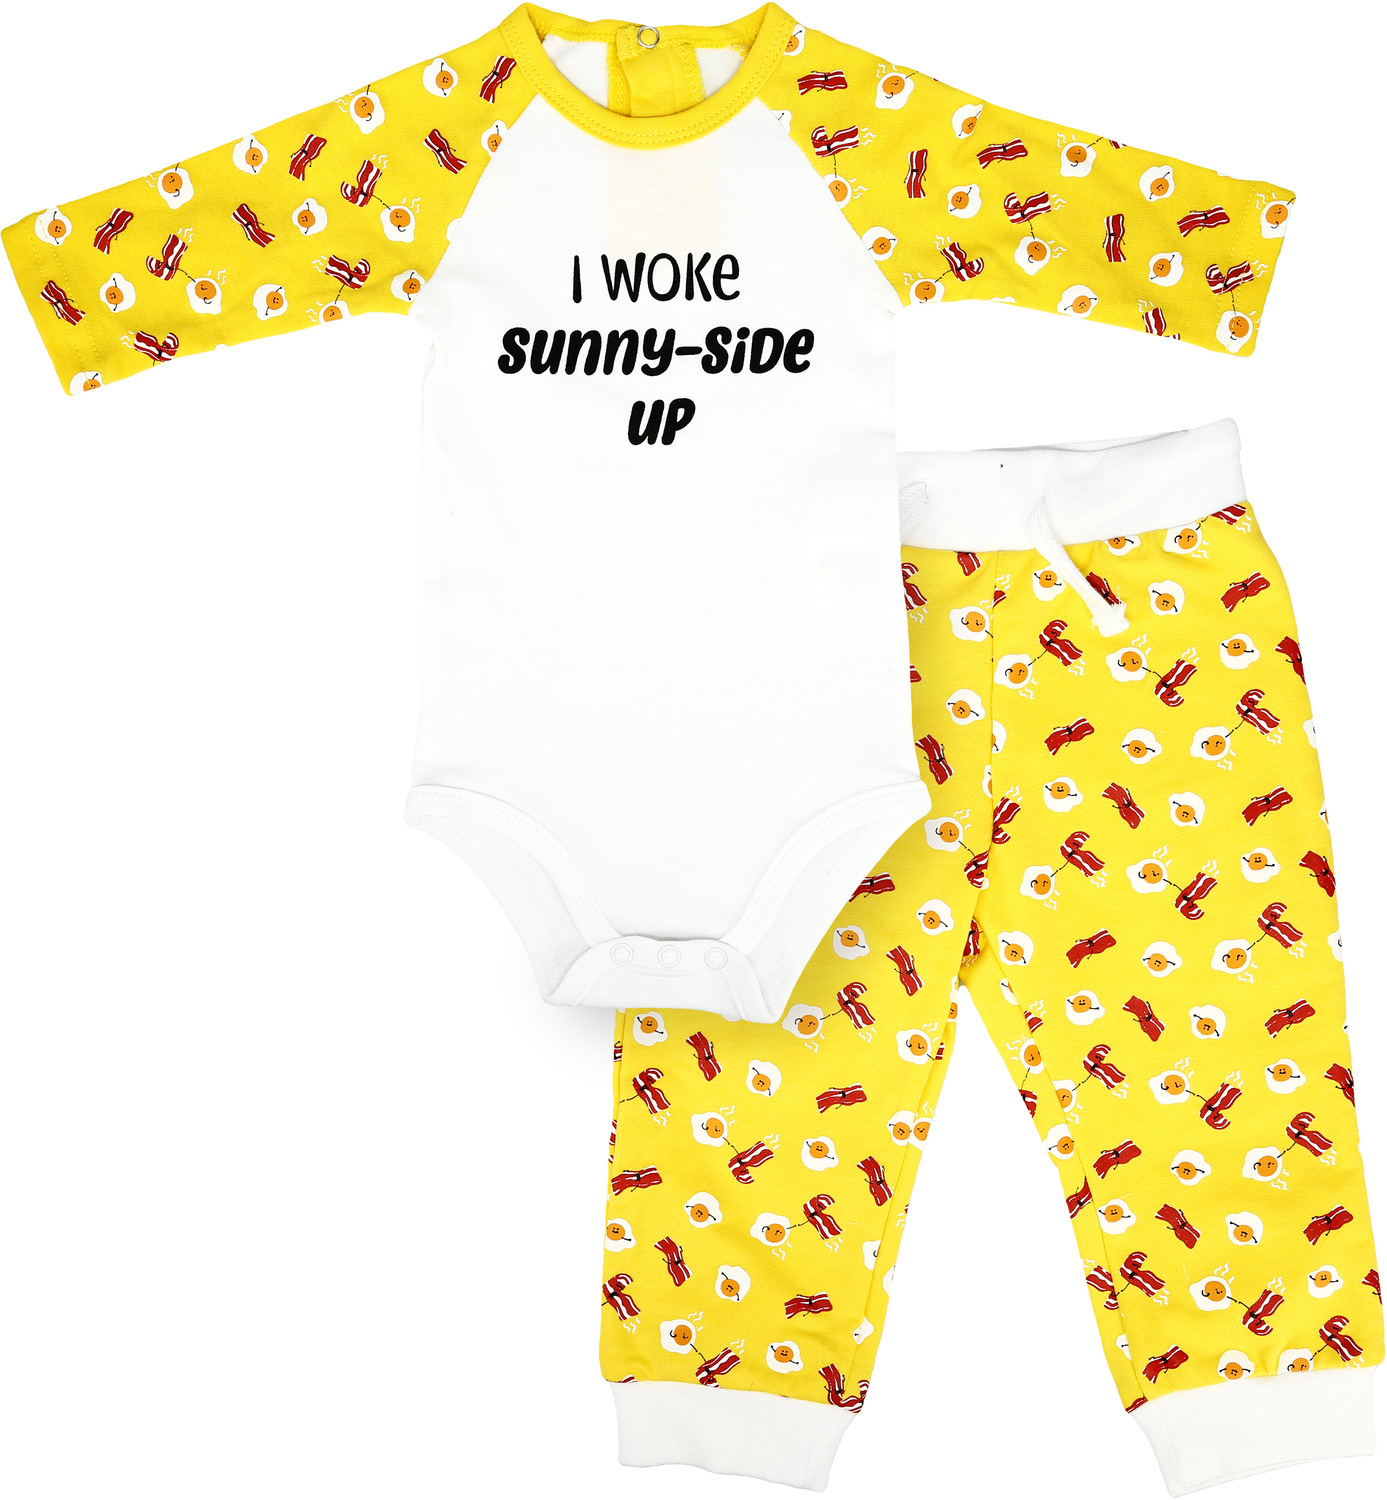 Sunny-Side Up by Late Night Snacks - Sunny-Side Up - 6-12 Months
Yellow Bodysuit & Pants Set